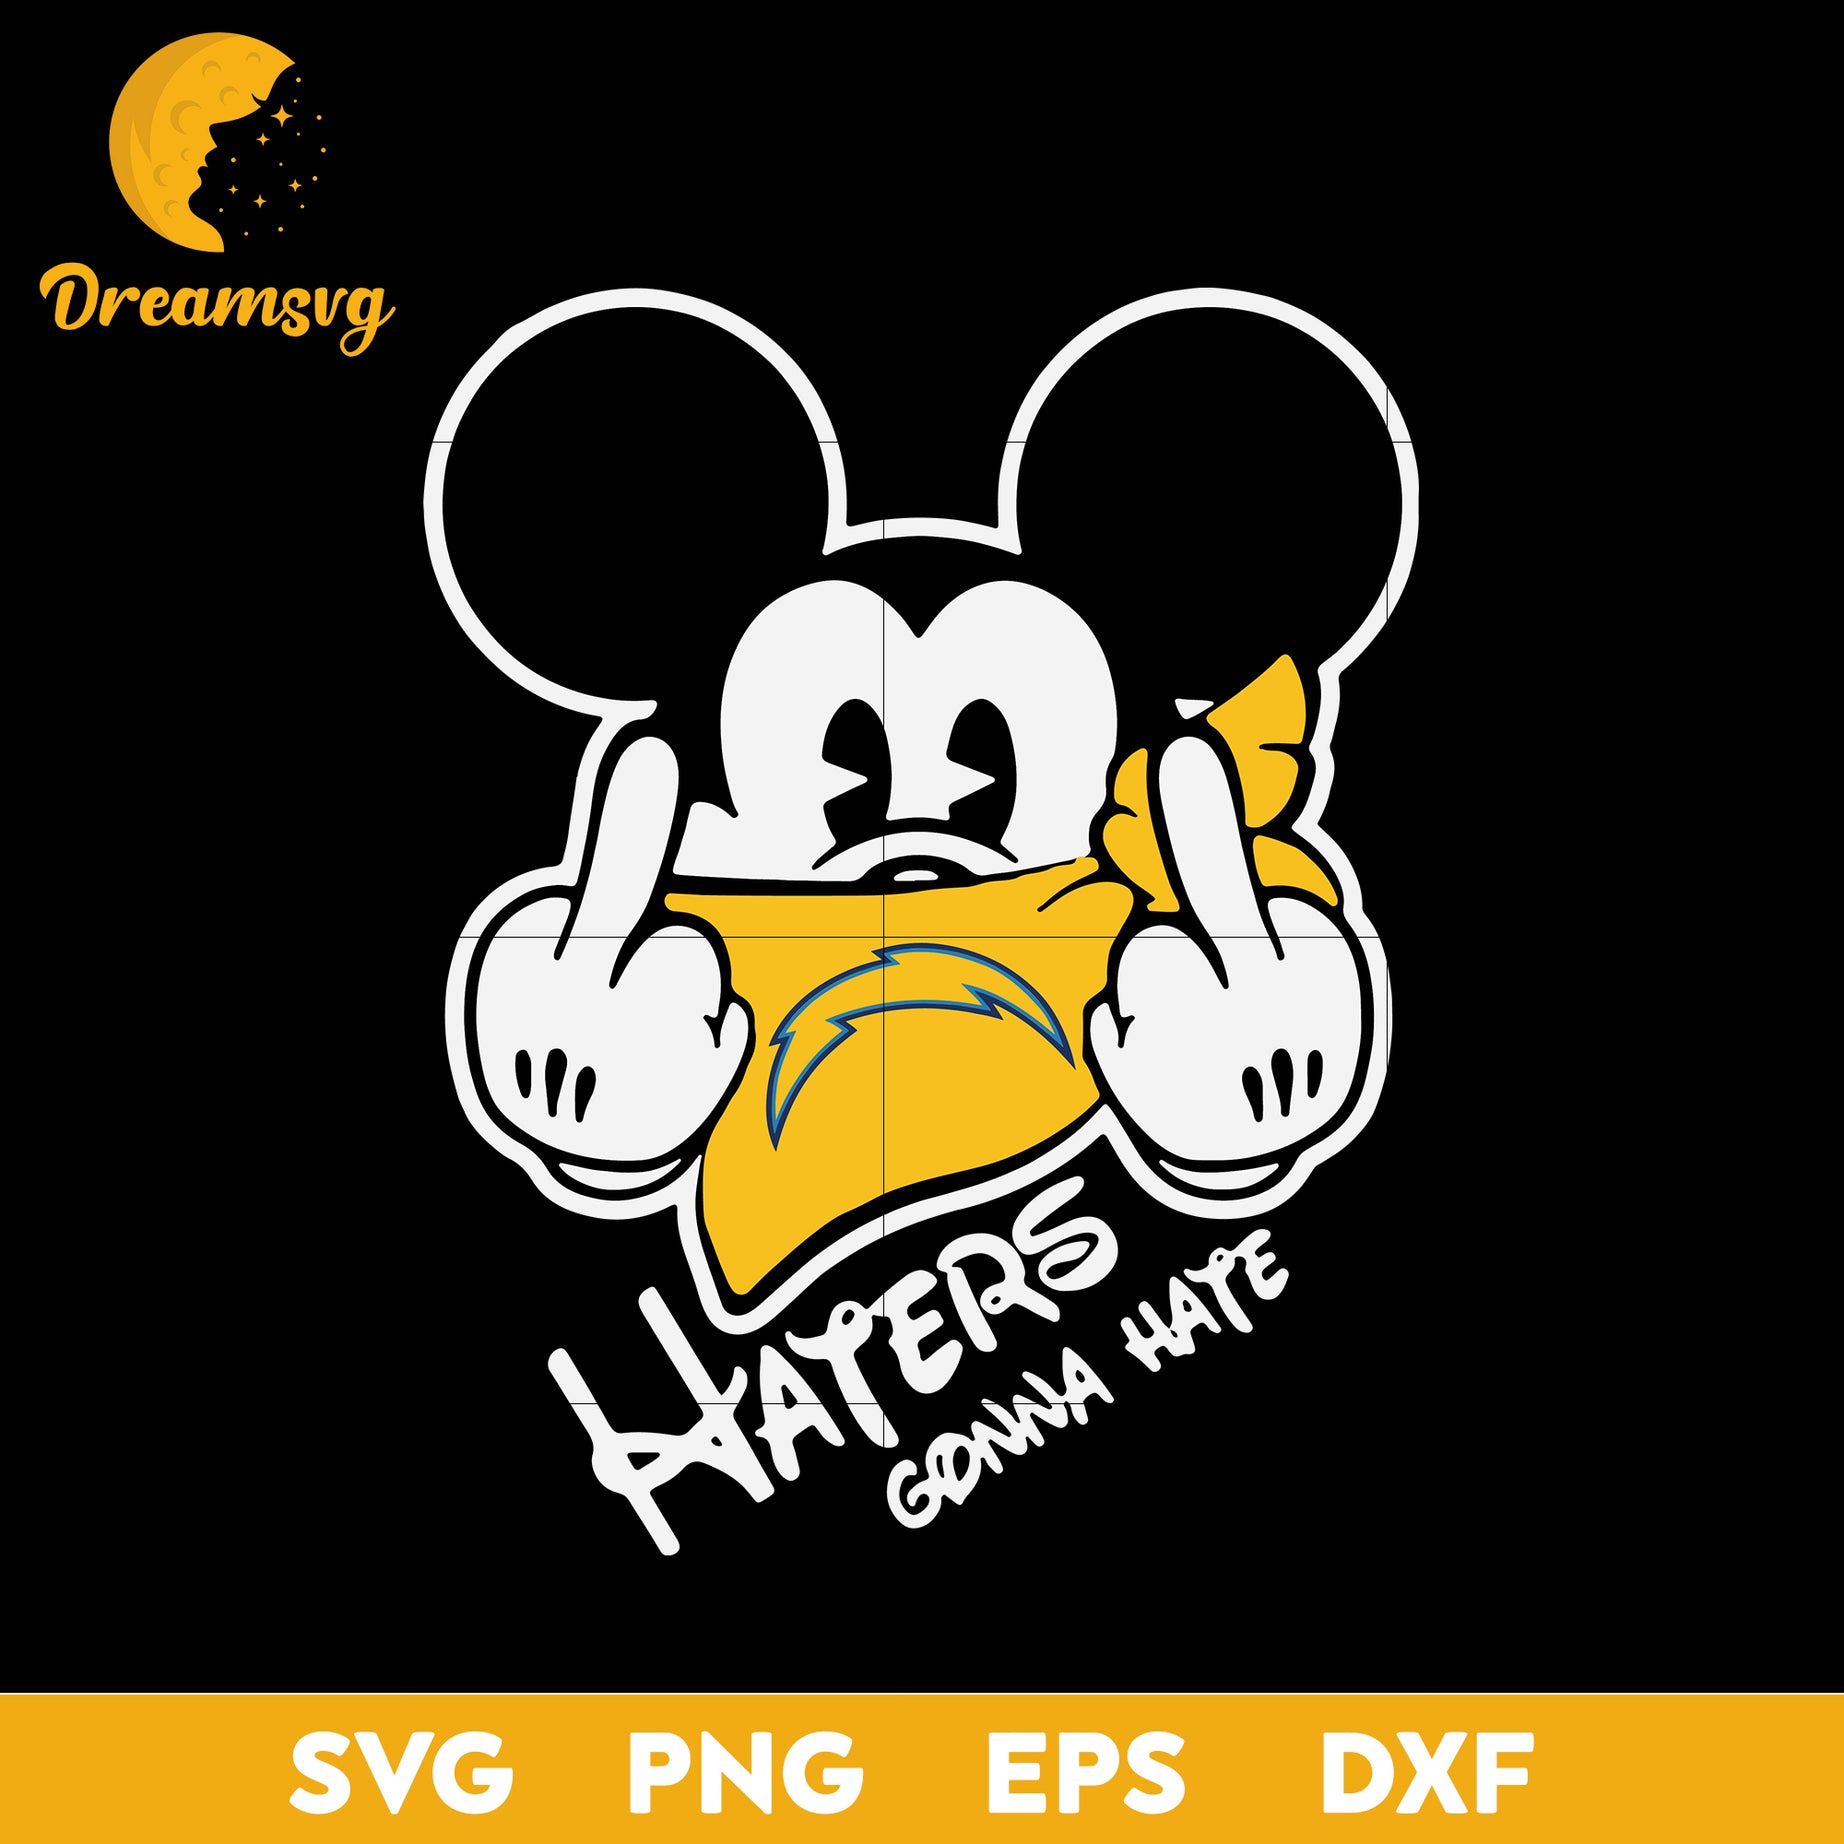 Los Angeles Chargers, Mickey, Haters Gonna Hate Svg, Nfl Svg, Png, Dxf, Eps Digital File.